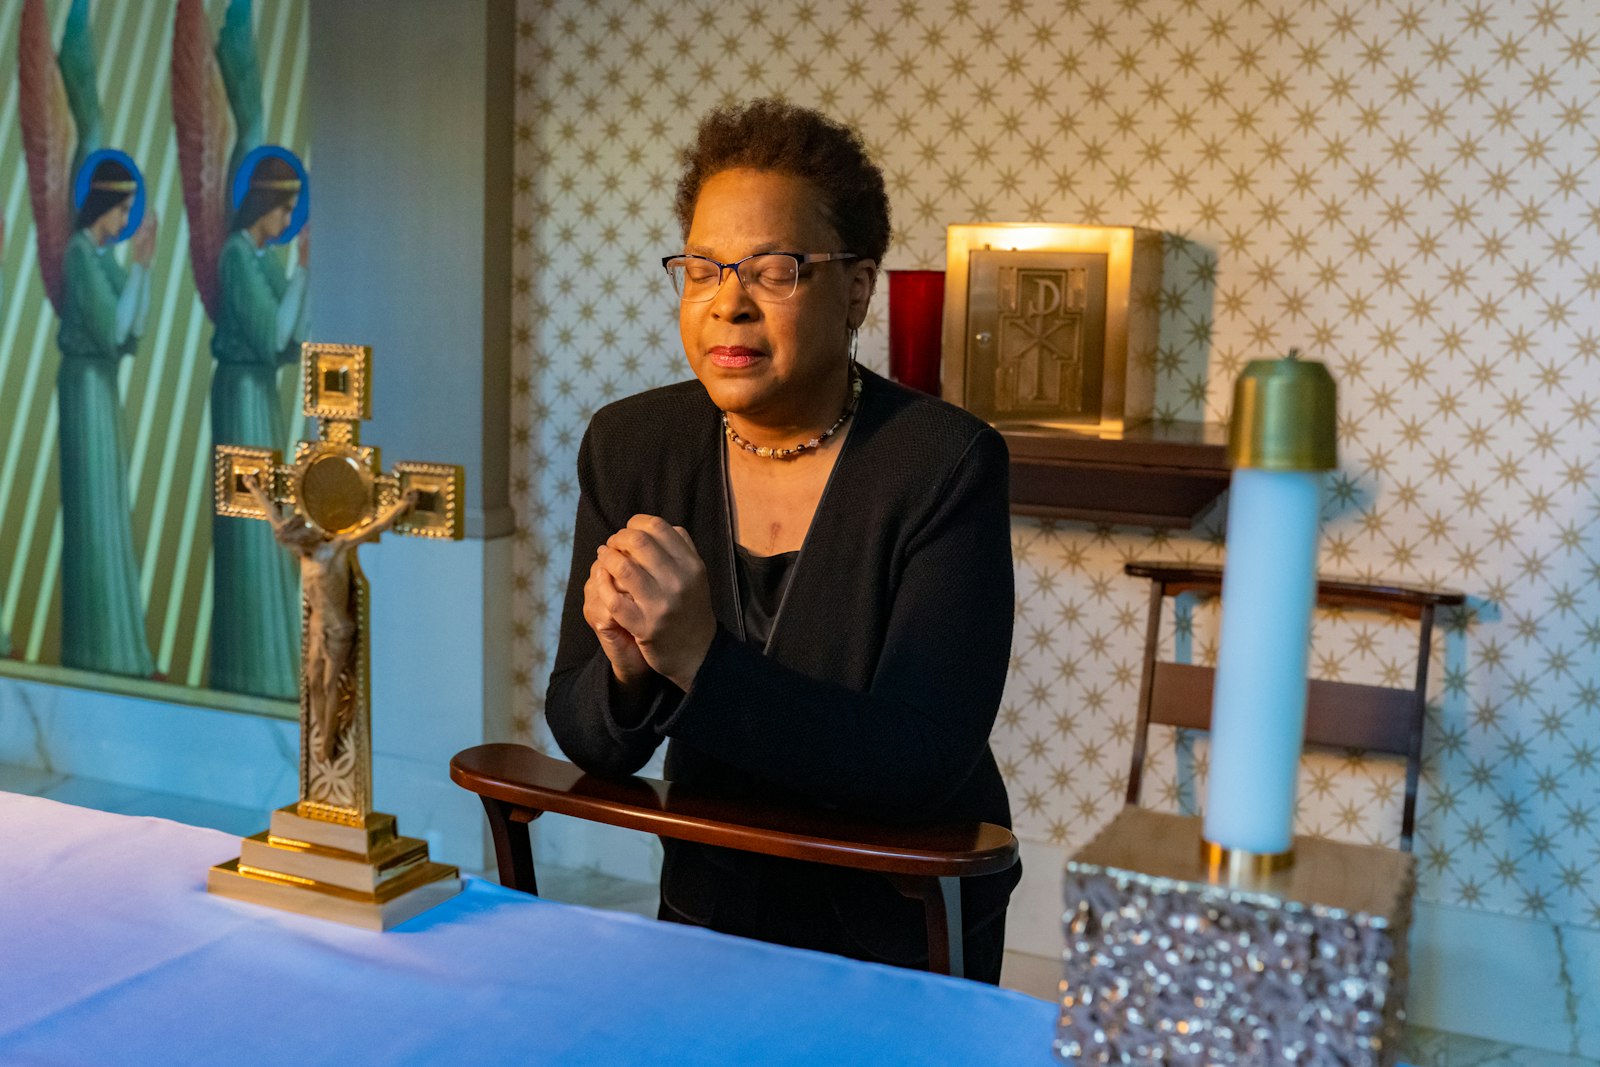 Figueroa prays in the chapel of the Archdiocese of Detroit's Chancery building in downtown Detroit. On July 23, 2021, Figueroa was informed she had a heart, and had to shut down her life for six months with two hours' notice. Figueroa straightened up her home, packed a bag and called her ride to take her to the hospital. She went into surgery, Saturday, July 24. The next thing she remembers, it was Wednesday, July 28.